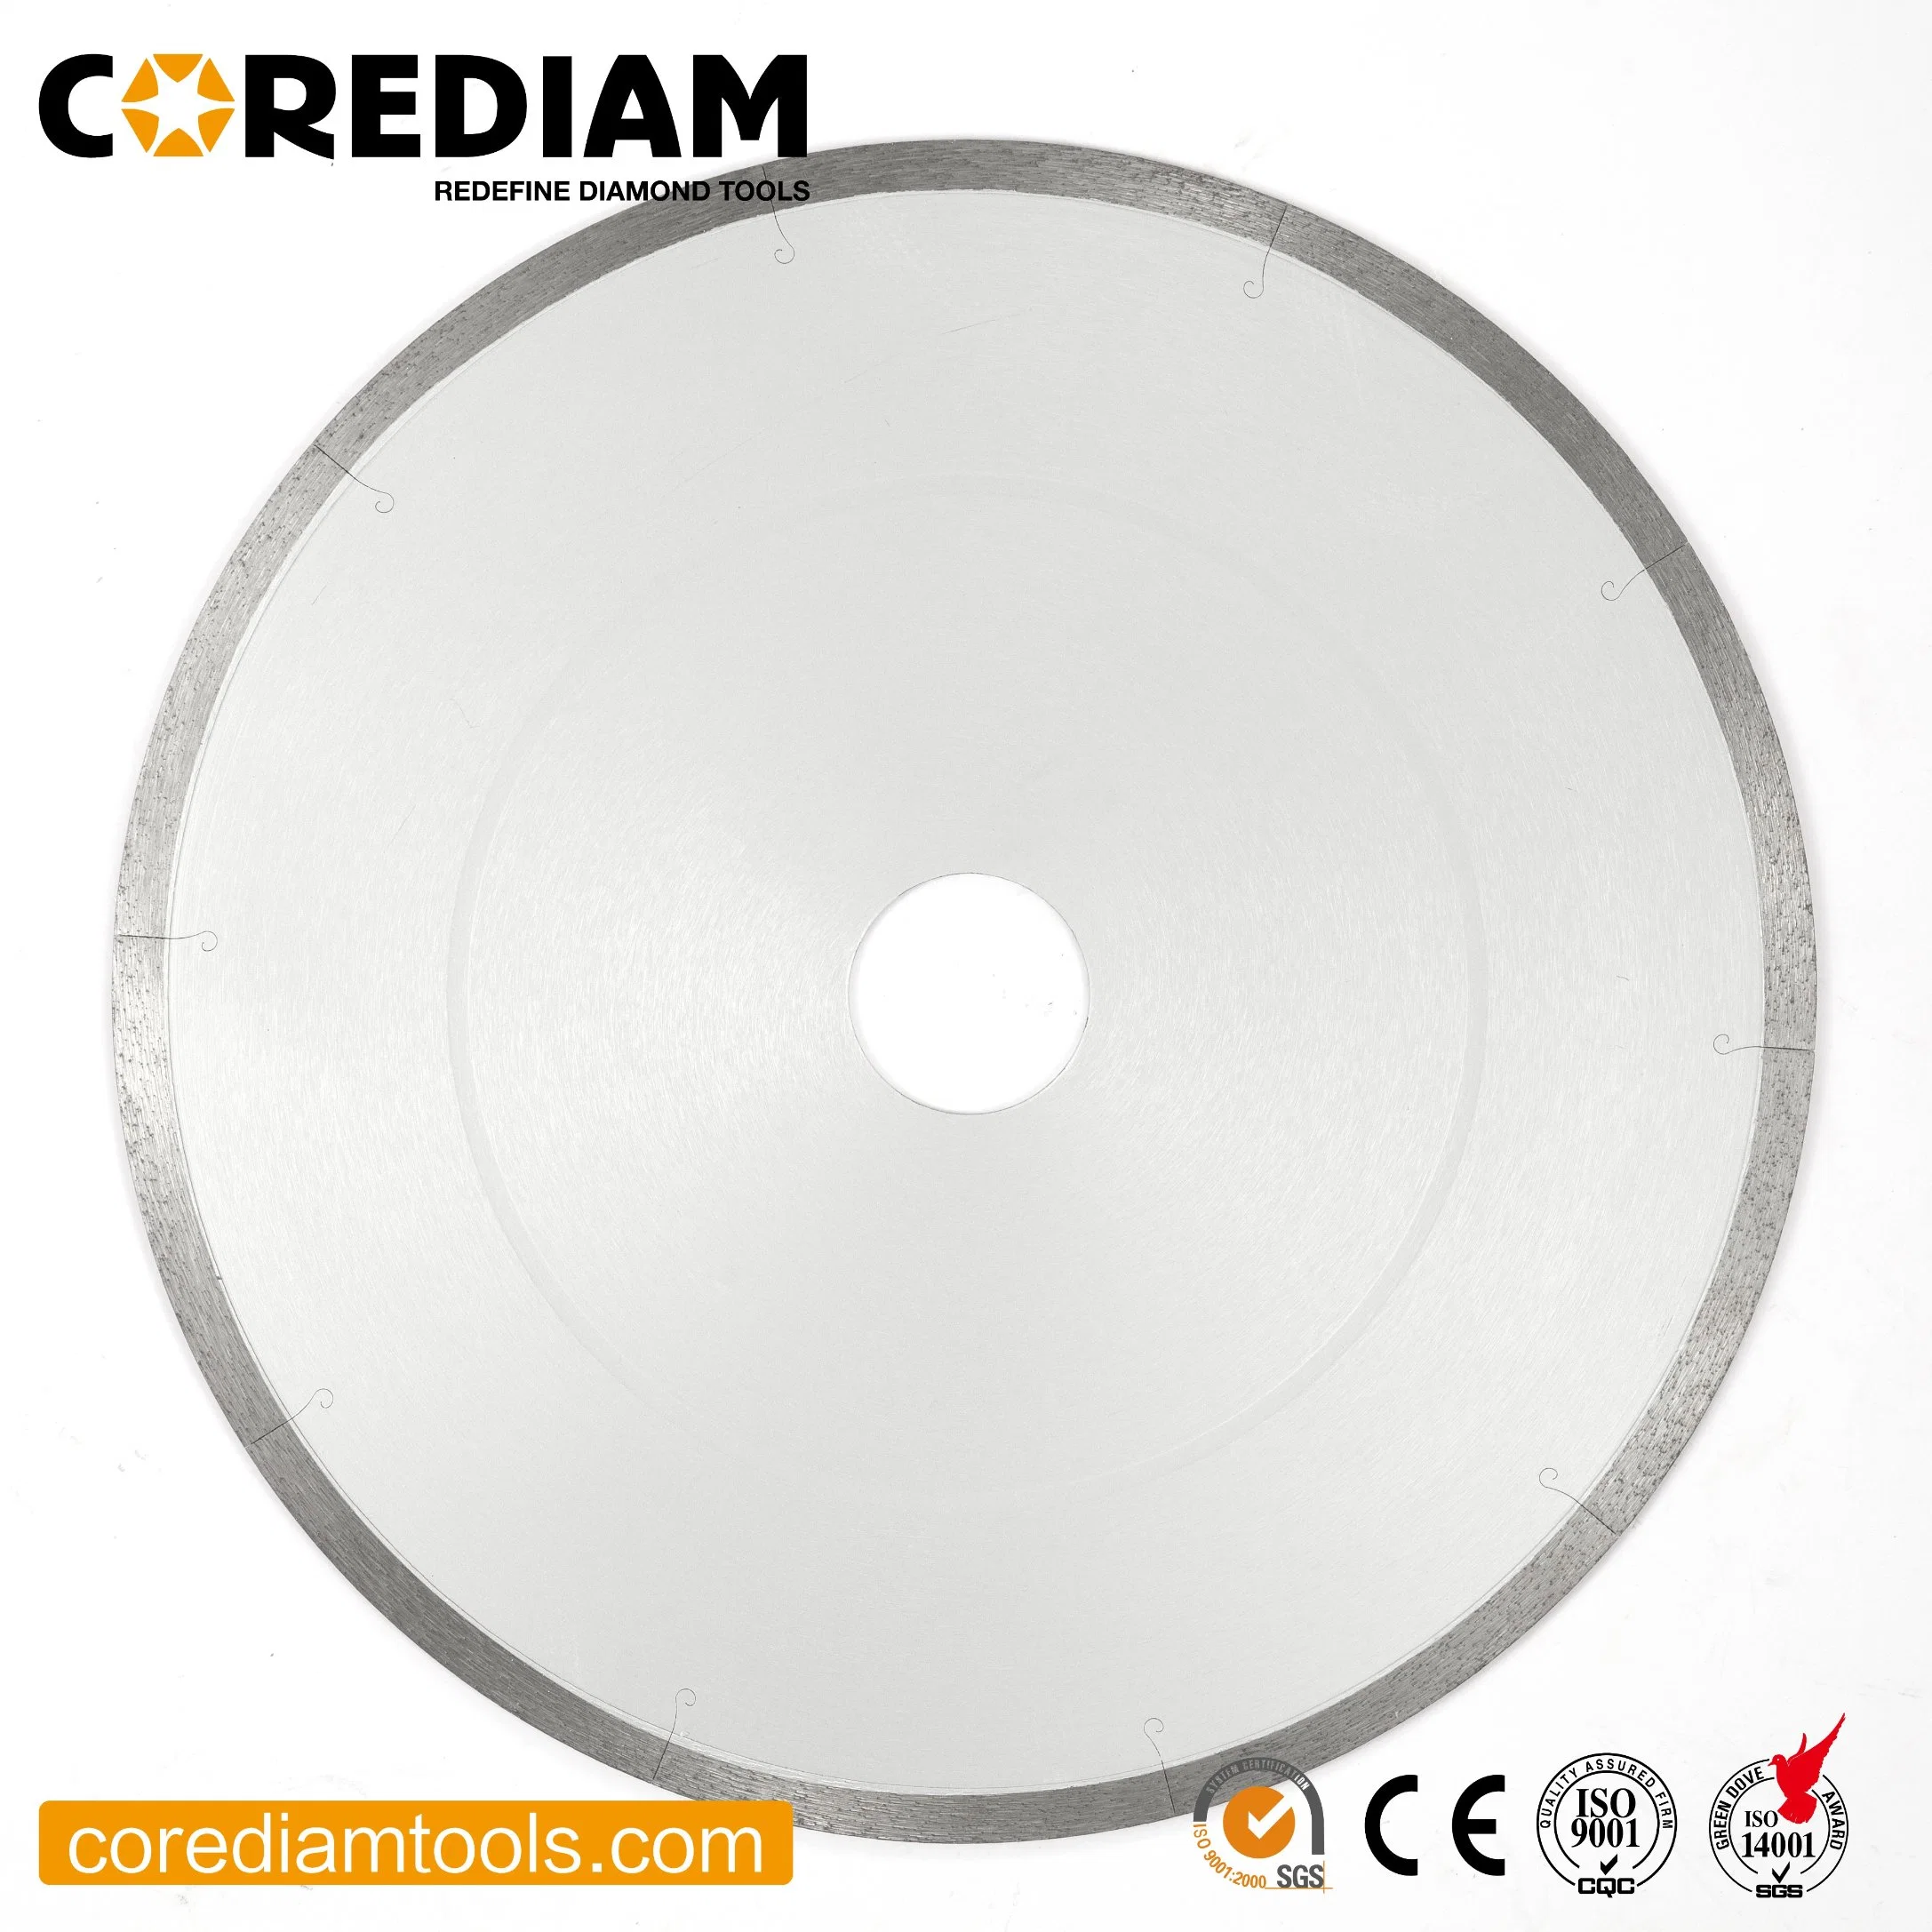 350mm/14-Inch Sinter Hot-Pressed Blade with Silent Cutting Slot for Ceramic Tile and Porcelain /Diamond Cutting Disc/Diamond Tools